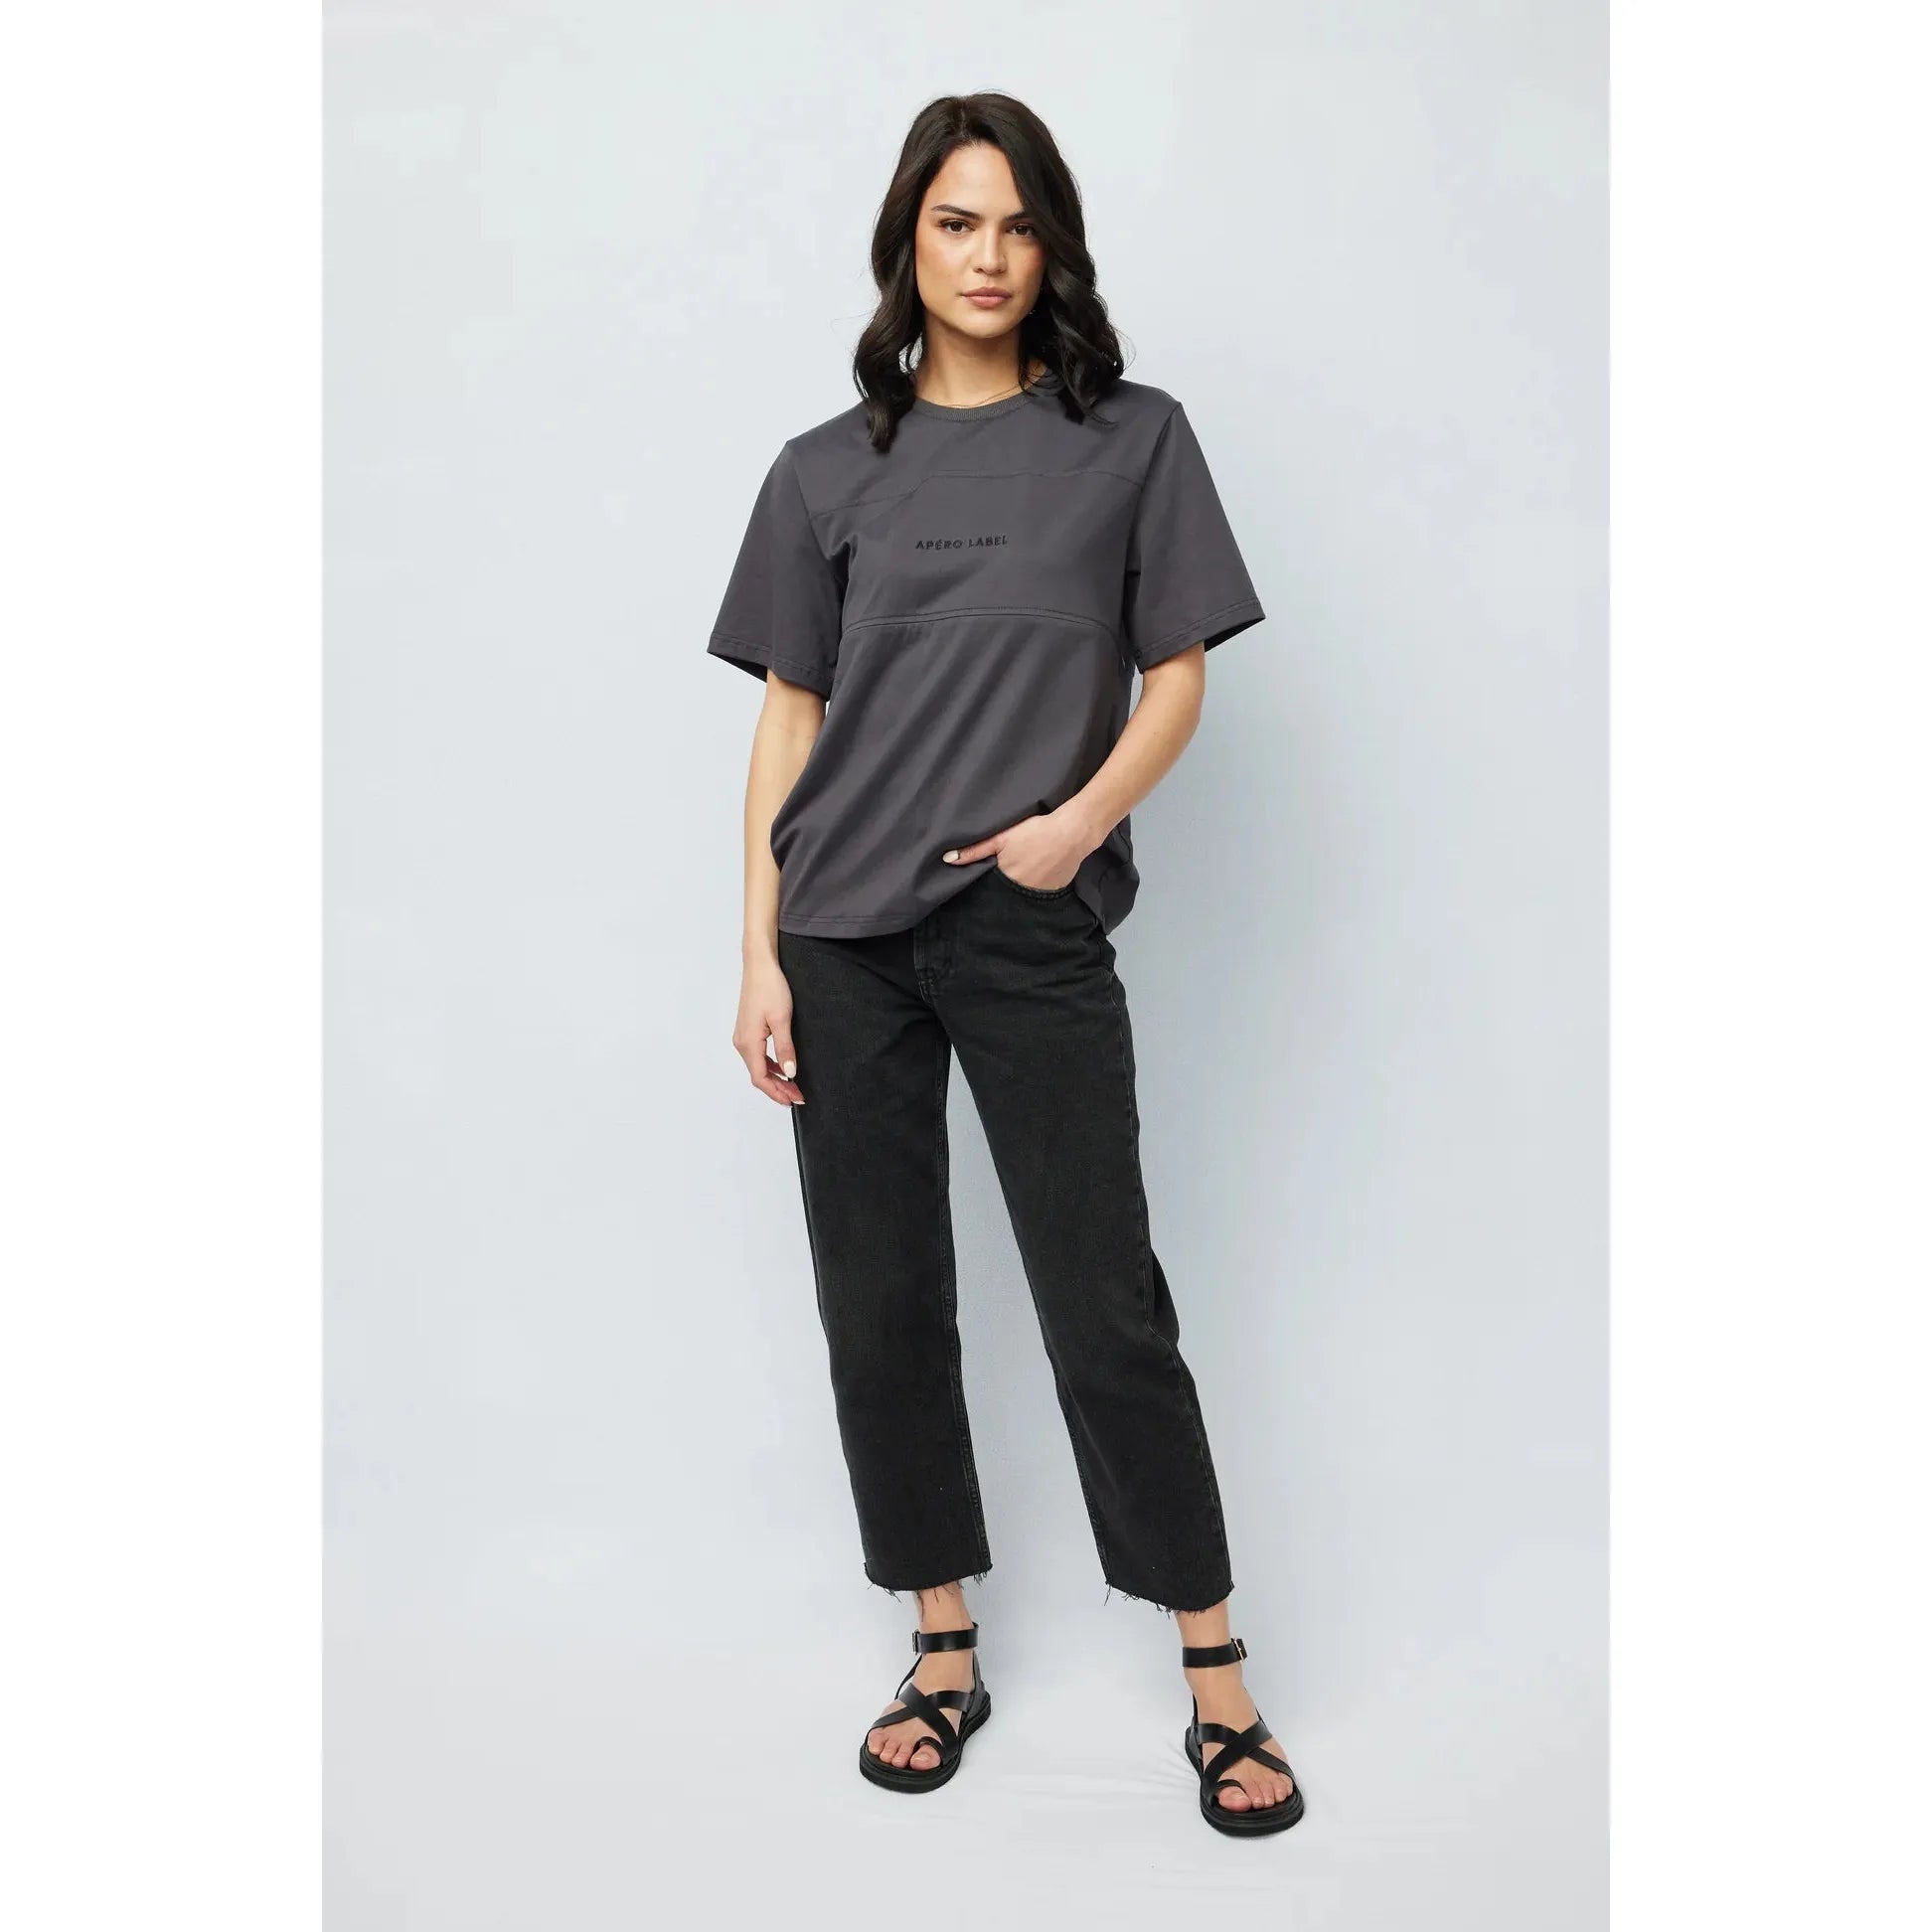 Label Embroidered Panel Tee - Charcoal / Black - Breastfeeding Friendly